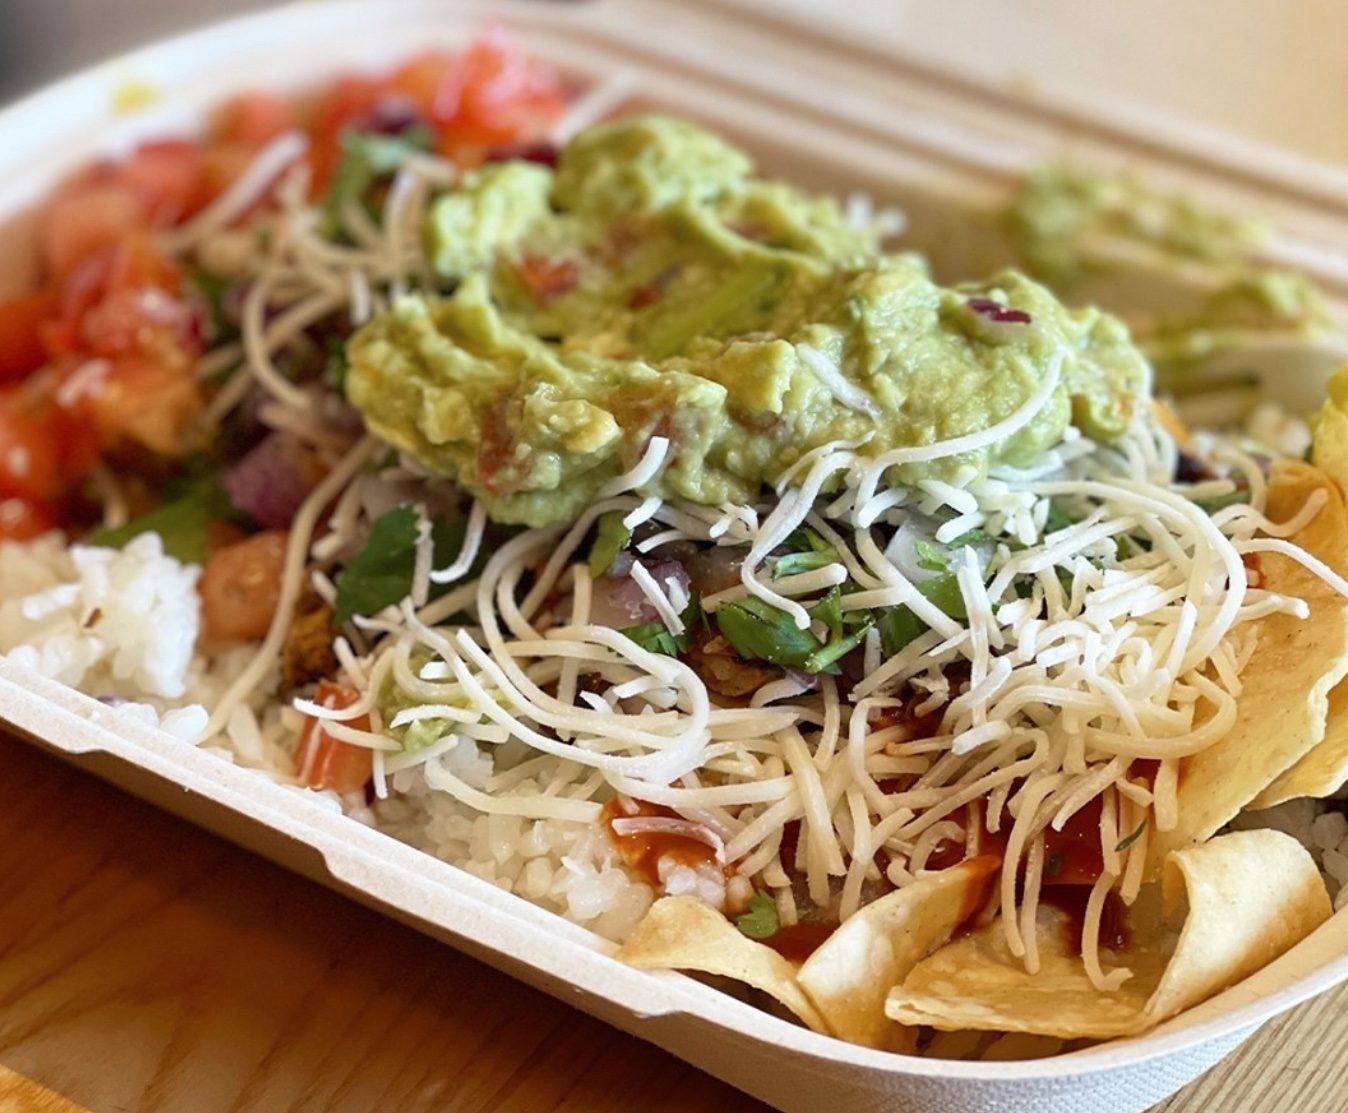 These Are the Healthiest Menu Items From Guzman y Gomez Australia, According to a Nutritionist